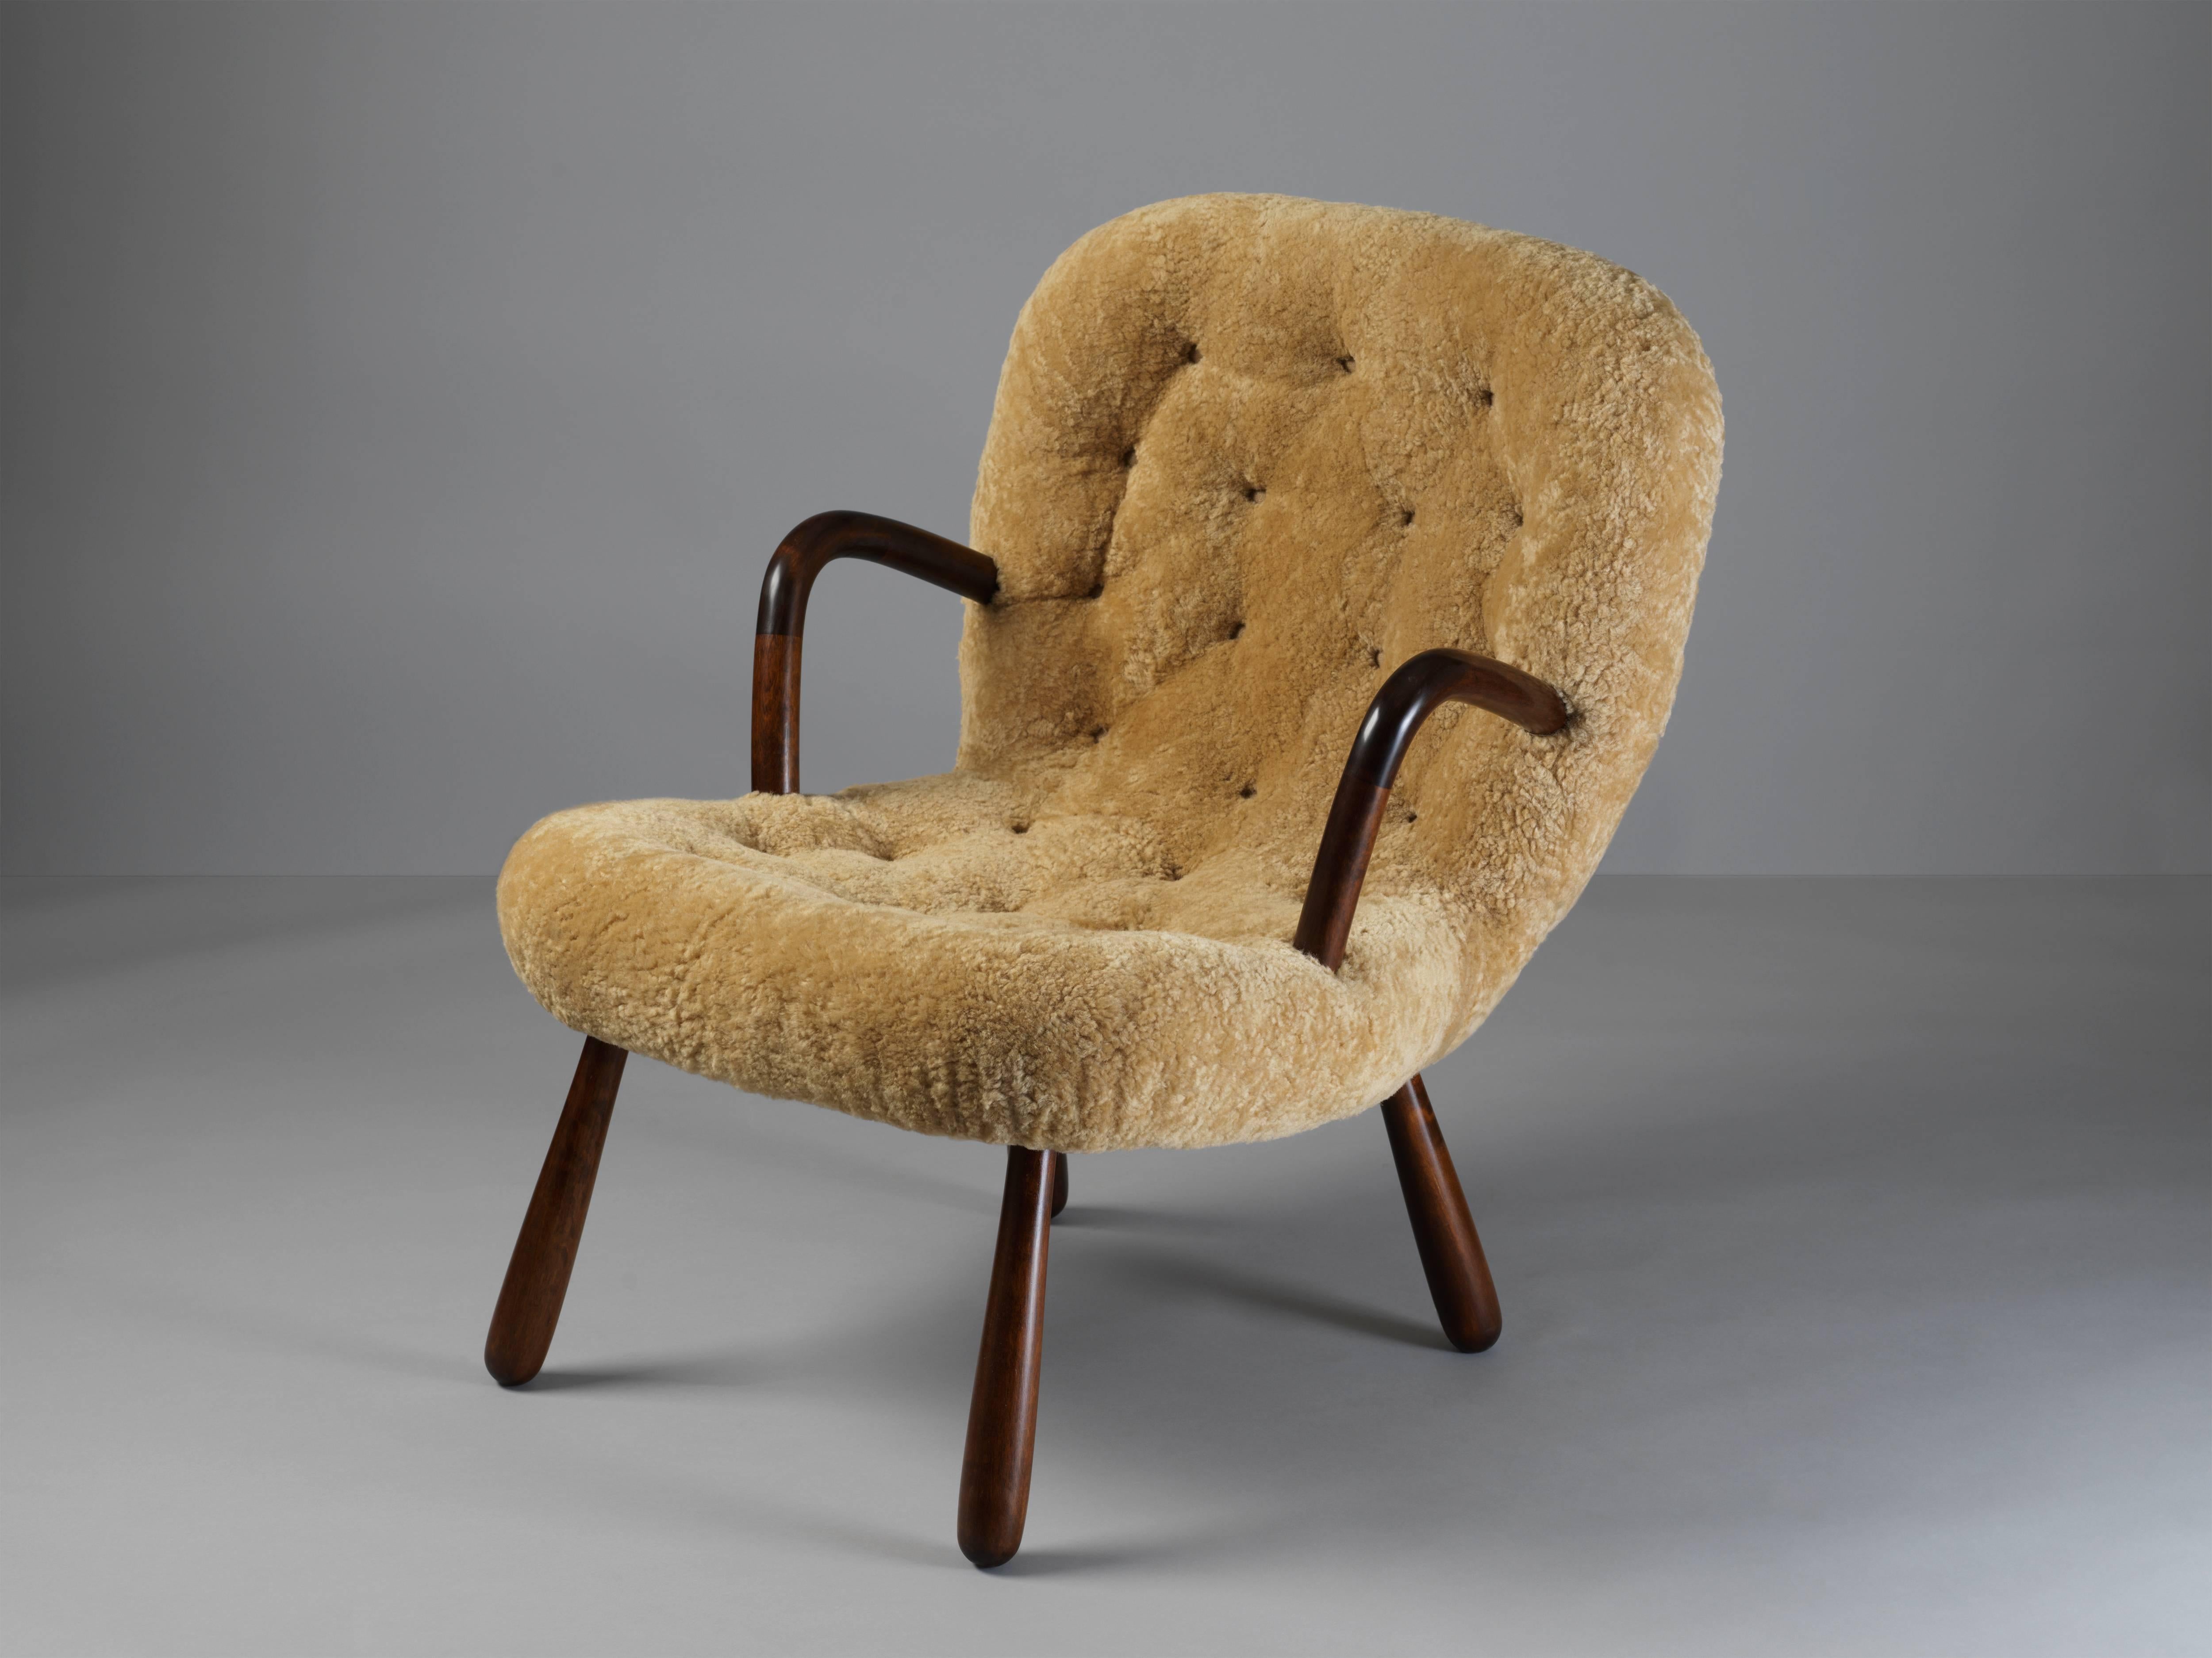 An unusual organic lounge chair / clam chair, attributed to Philip Arctander. Dark stained beech frame, upholstered in natural beige sheepskin.

Philip Arctander had associations with Danish architects such as Flemming and Mogens Lassen and Arne